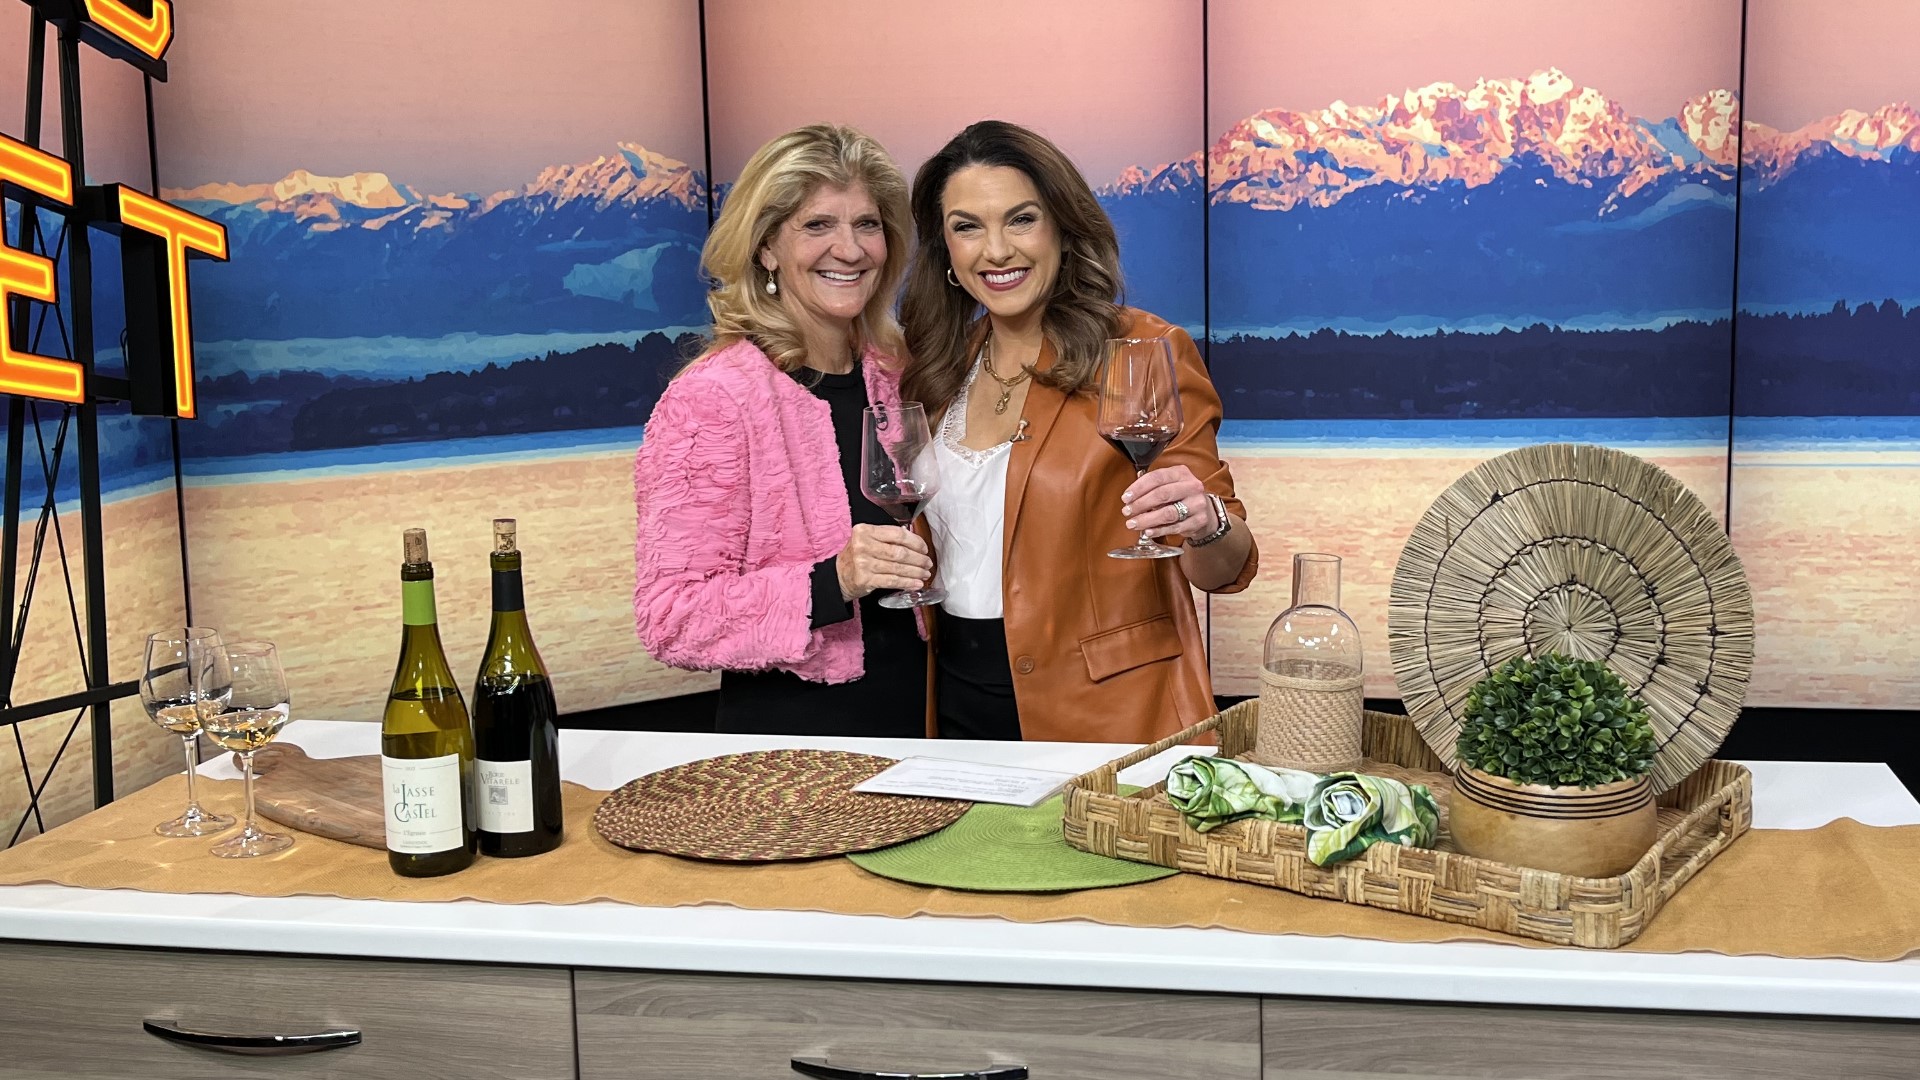 Carol Bailey-Medwell shares two favorite French wines, available at the Seattle tasting room.